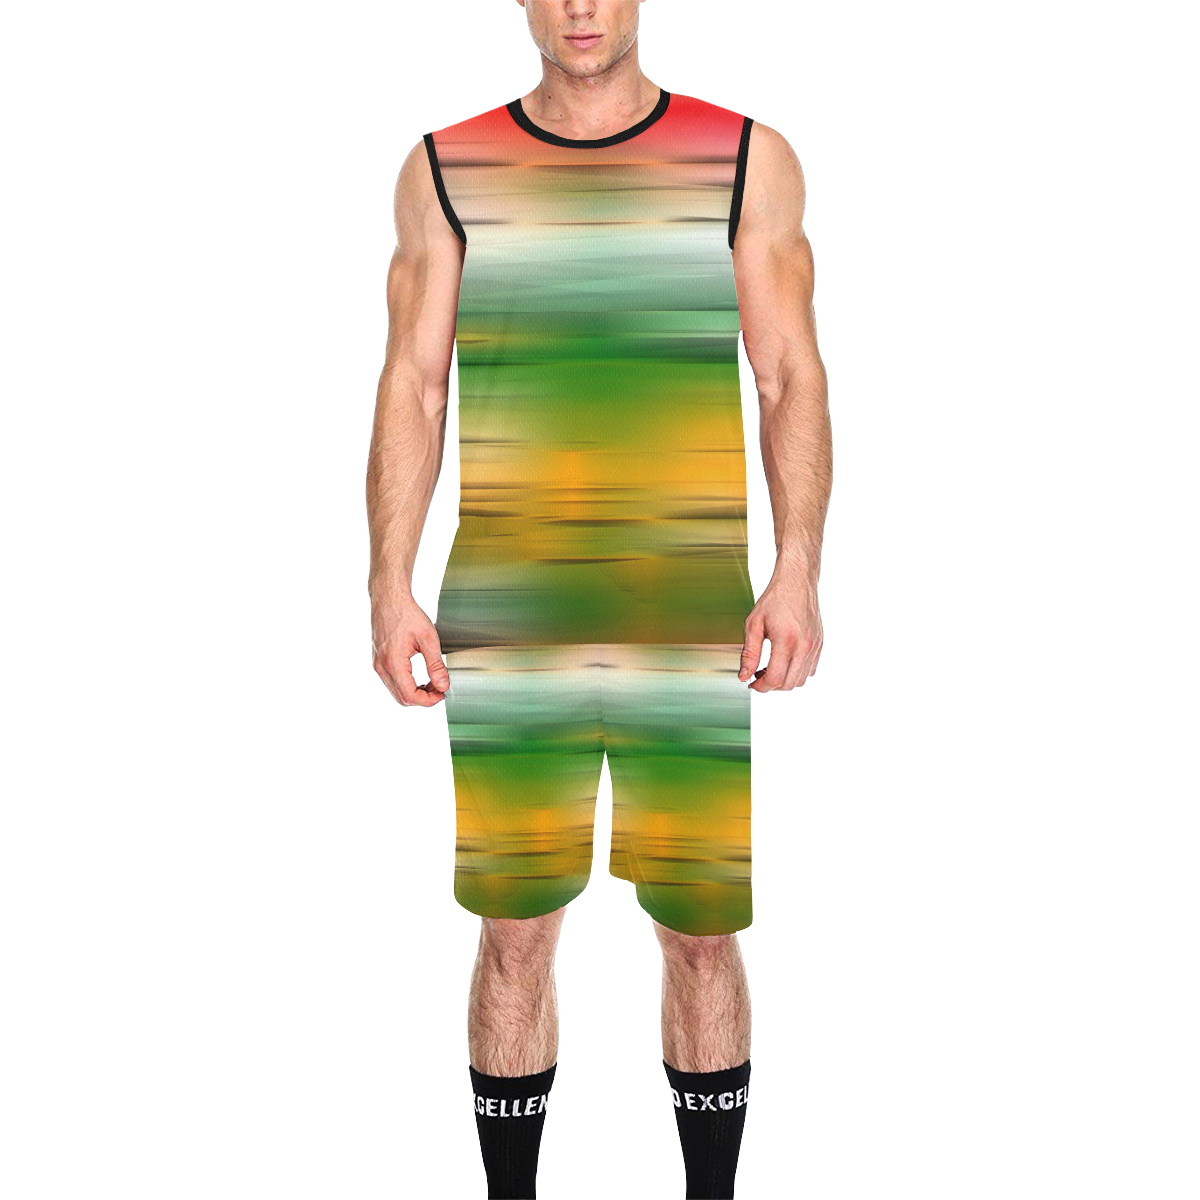 noisy gradient 3 by JamColors All Over Print Basketball Uniform